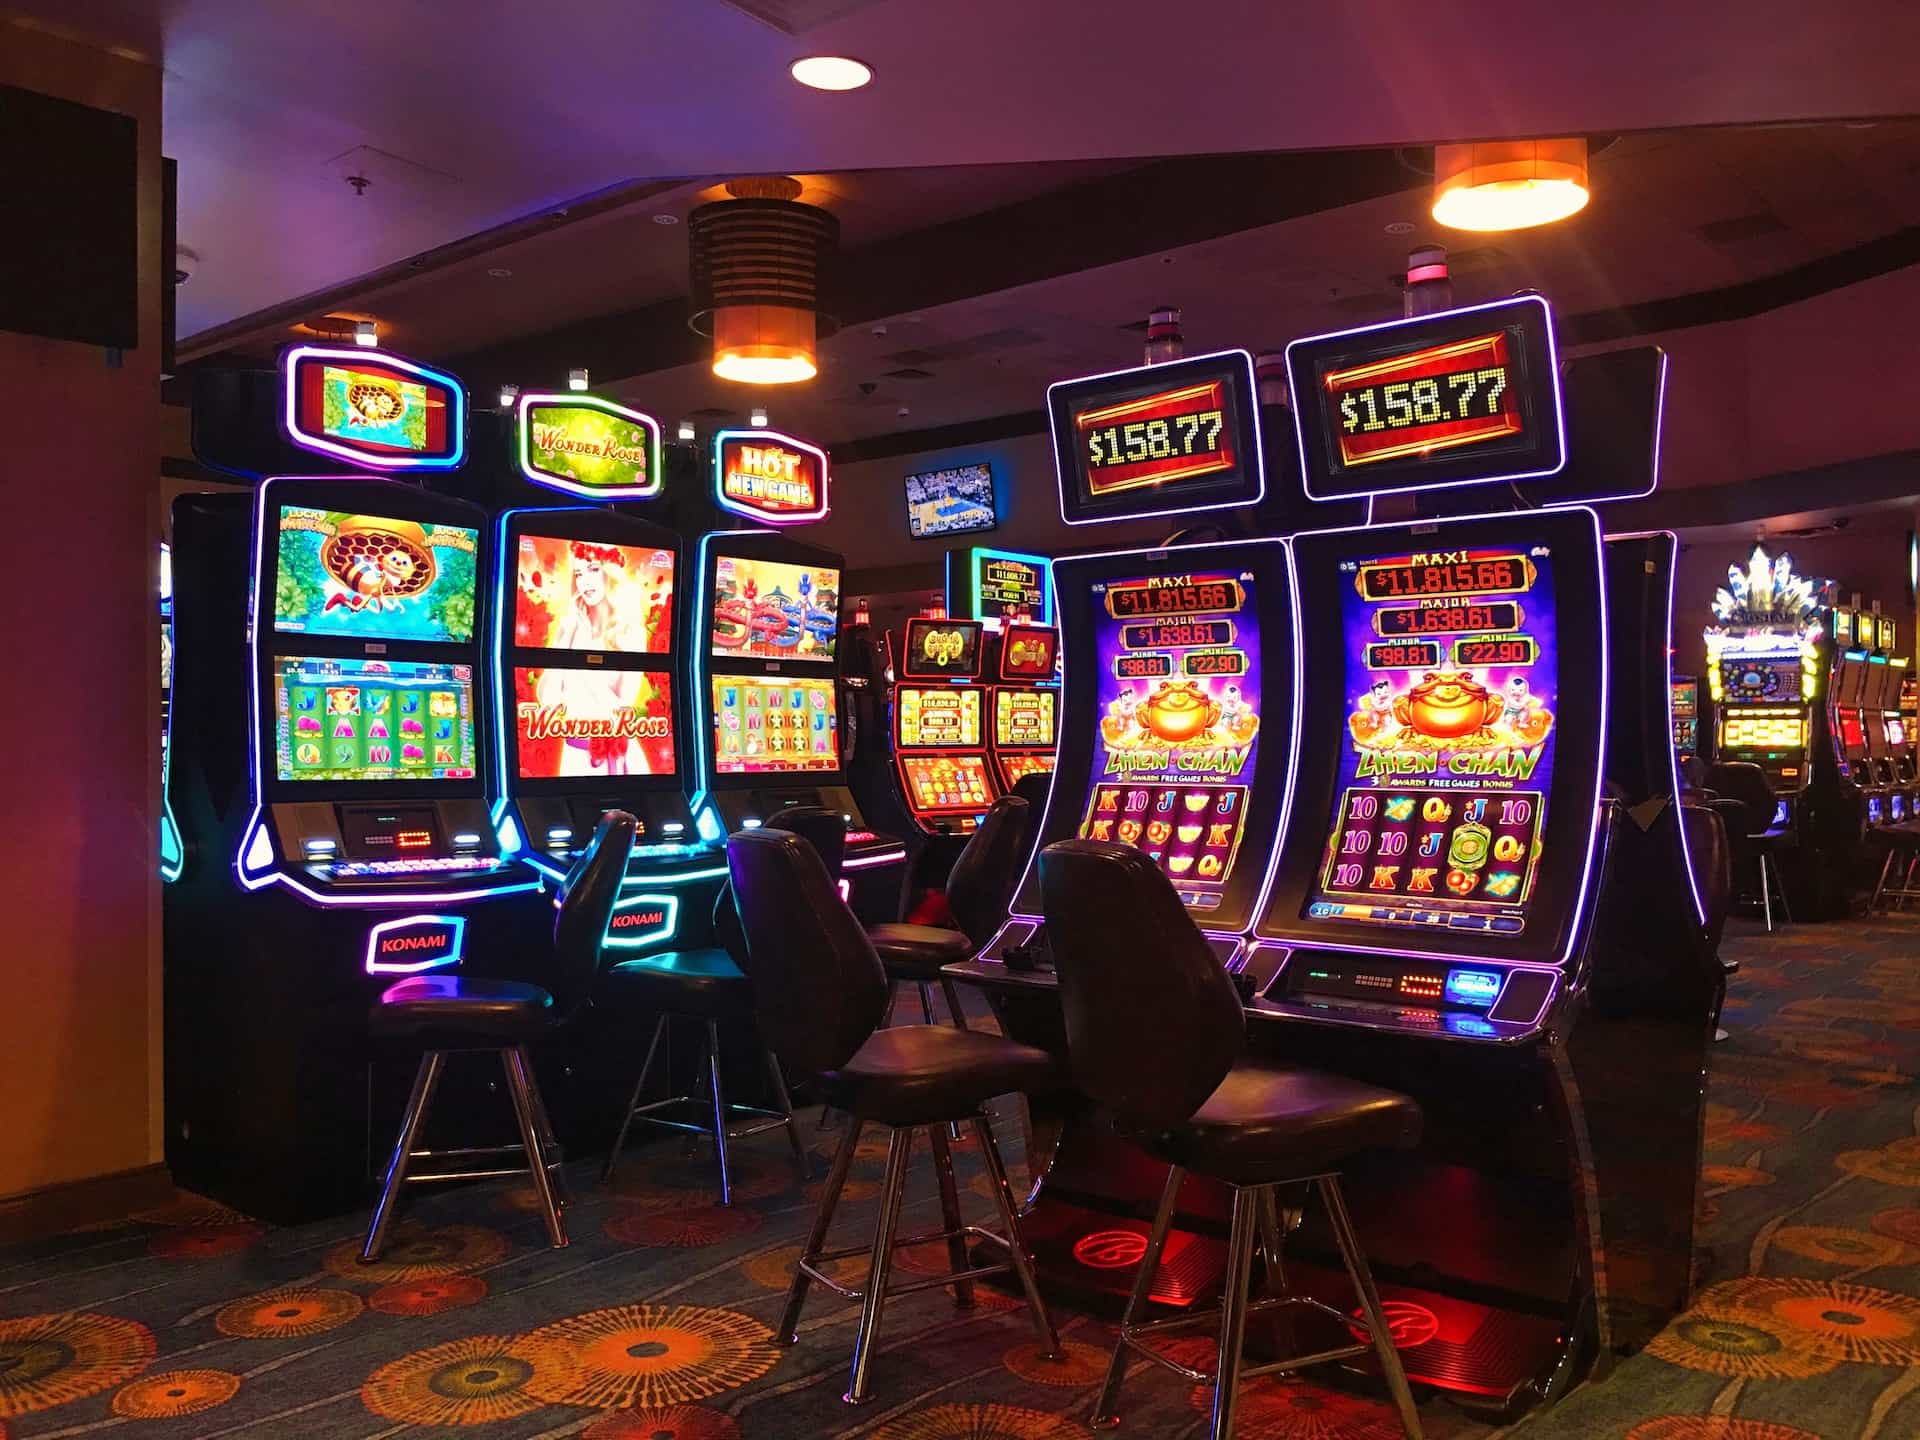 Modern slot machines in a casino gaming room.